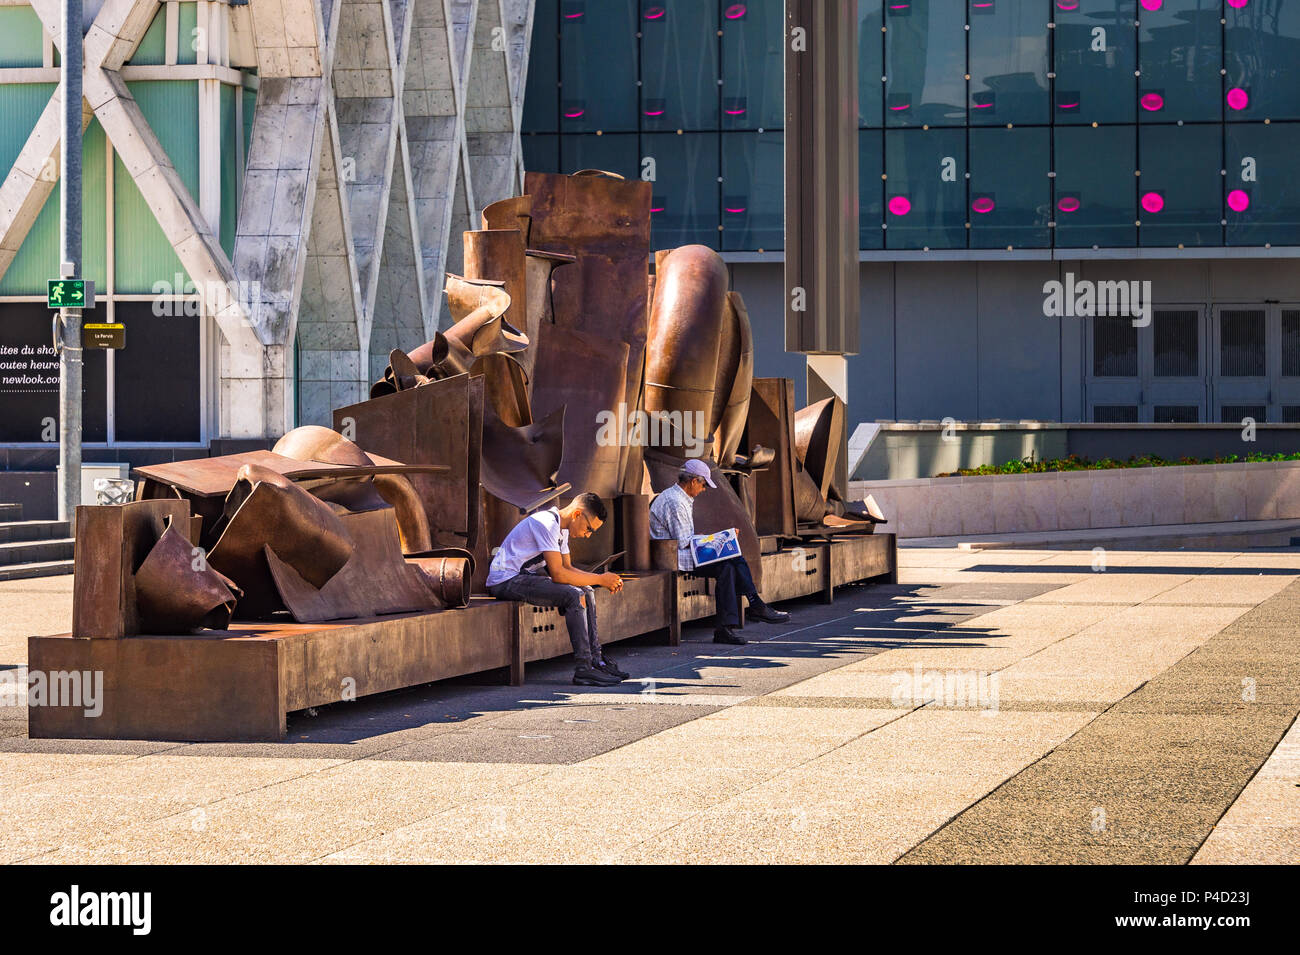 'After Olympia' sculpture by Anthony Caro sits in the La Defense area in Paris, France Stock Photo